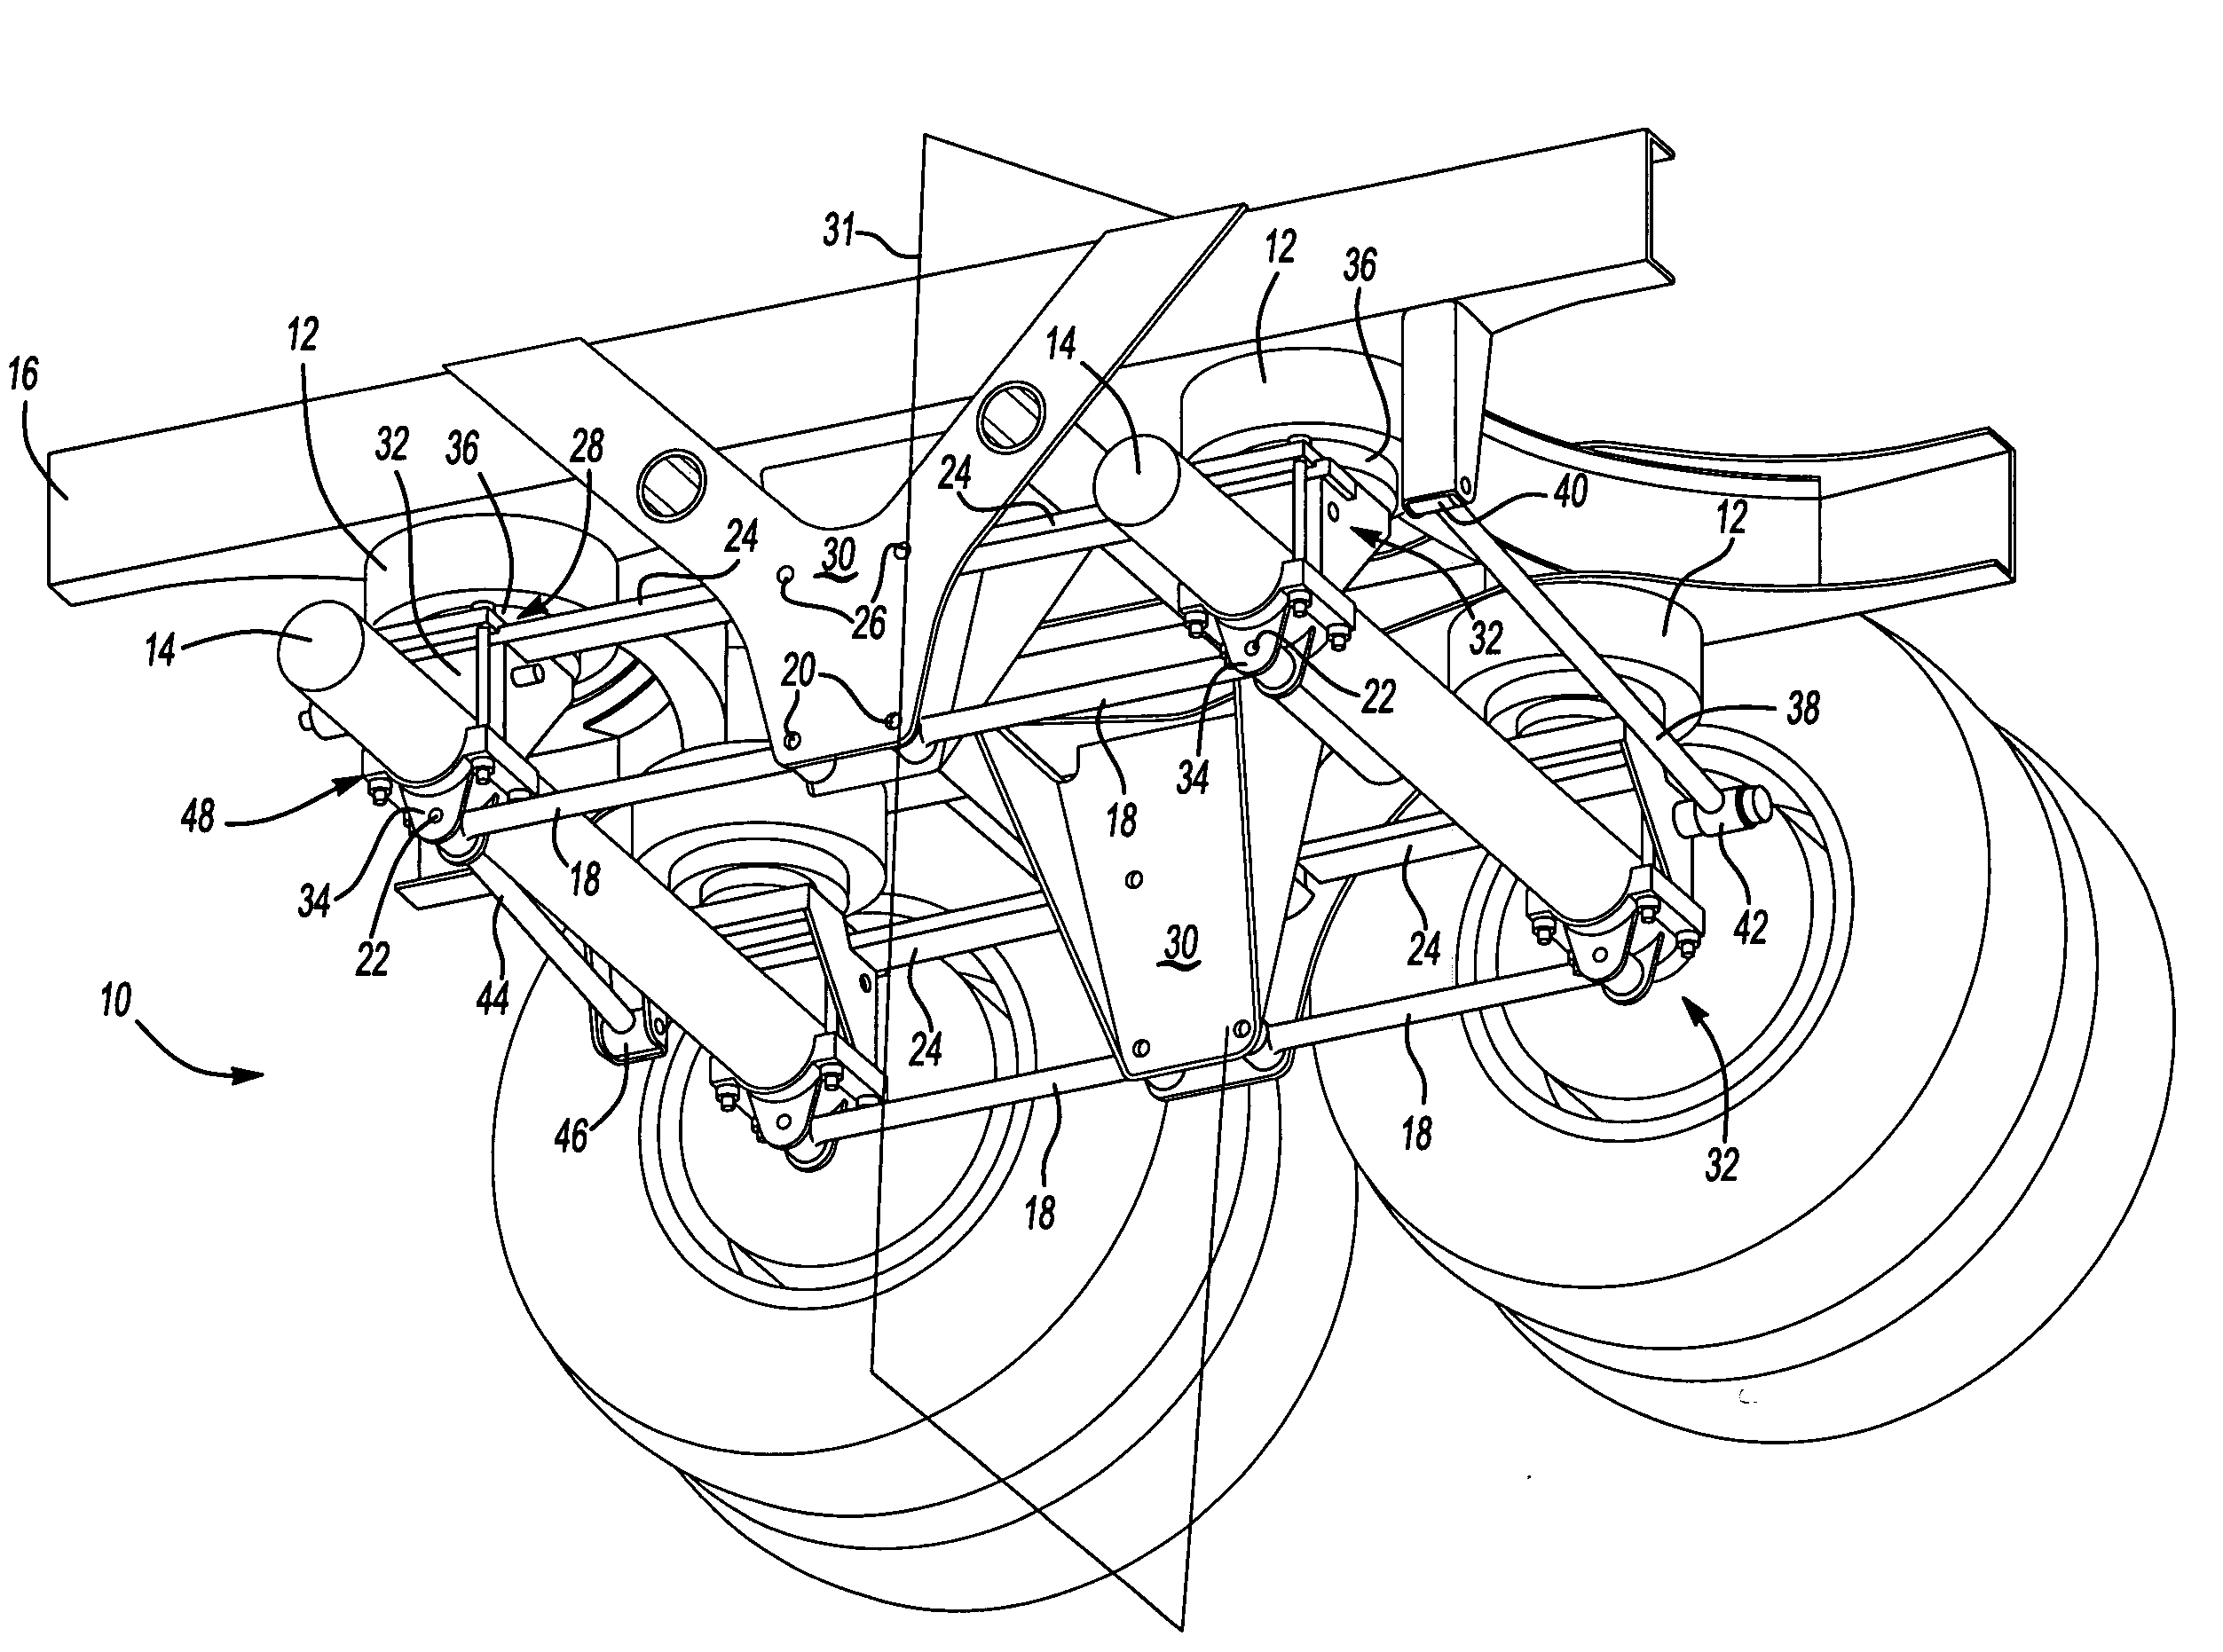 Tandem axle suspension assembly